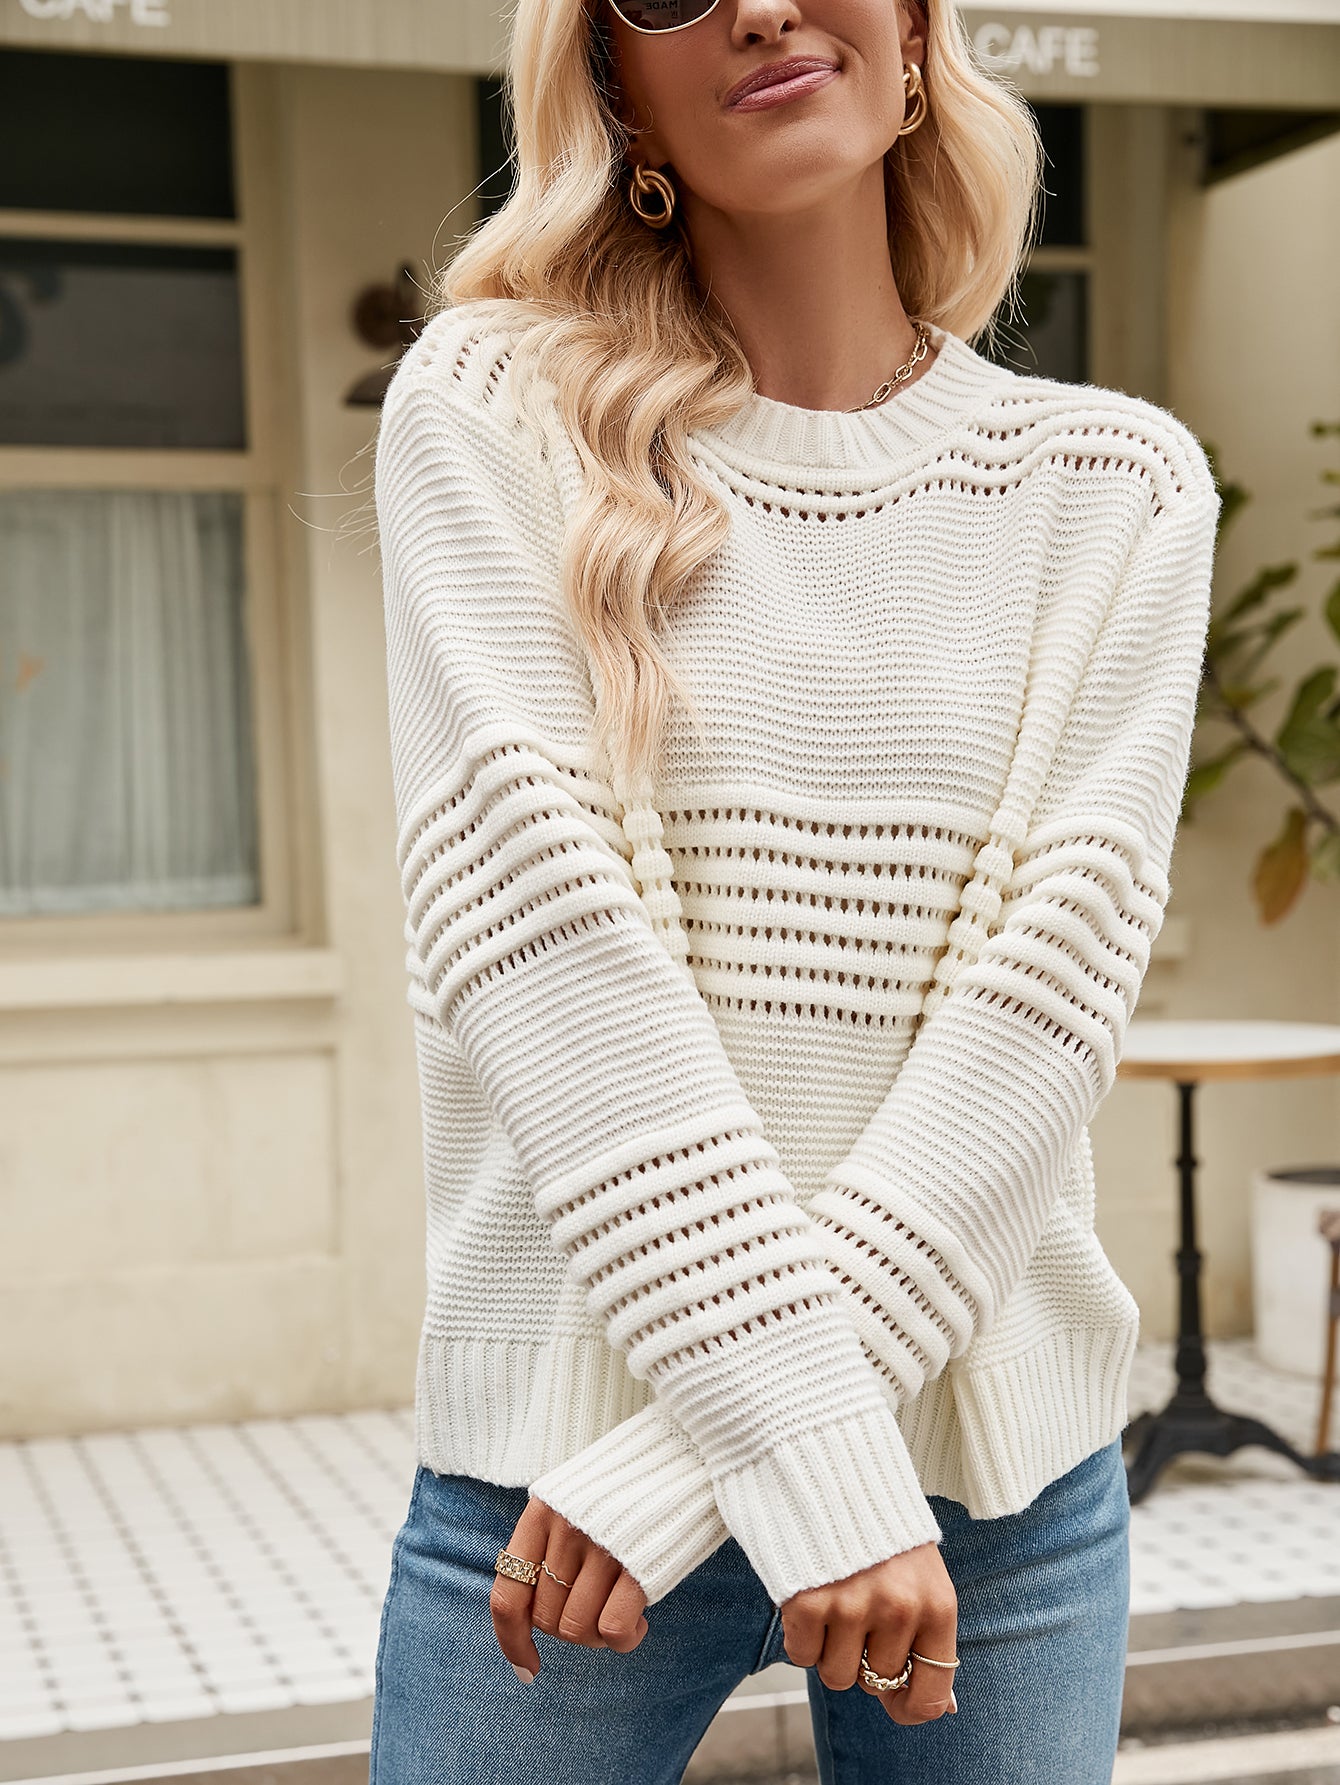 Charming Eyelet Accents Sweater - Women's Round Neck Knitted Pullover Sweaters - Chuzko Women Clothing